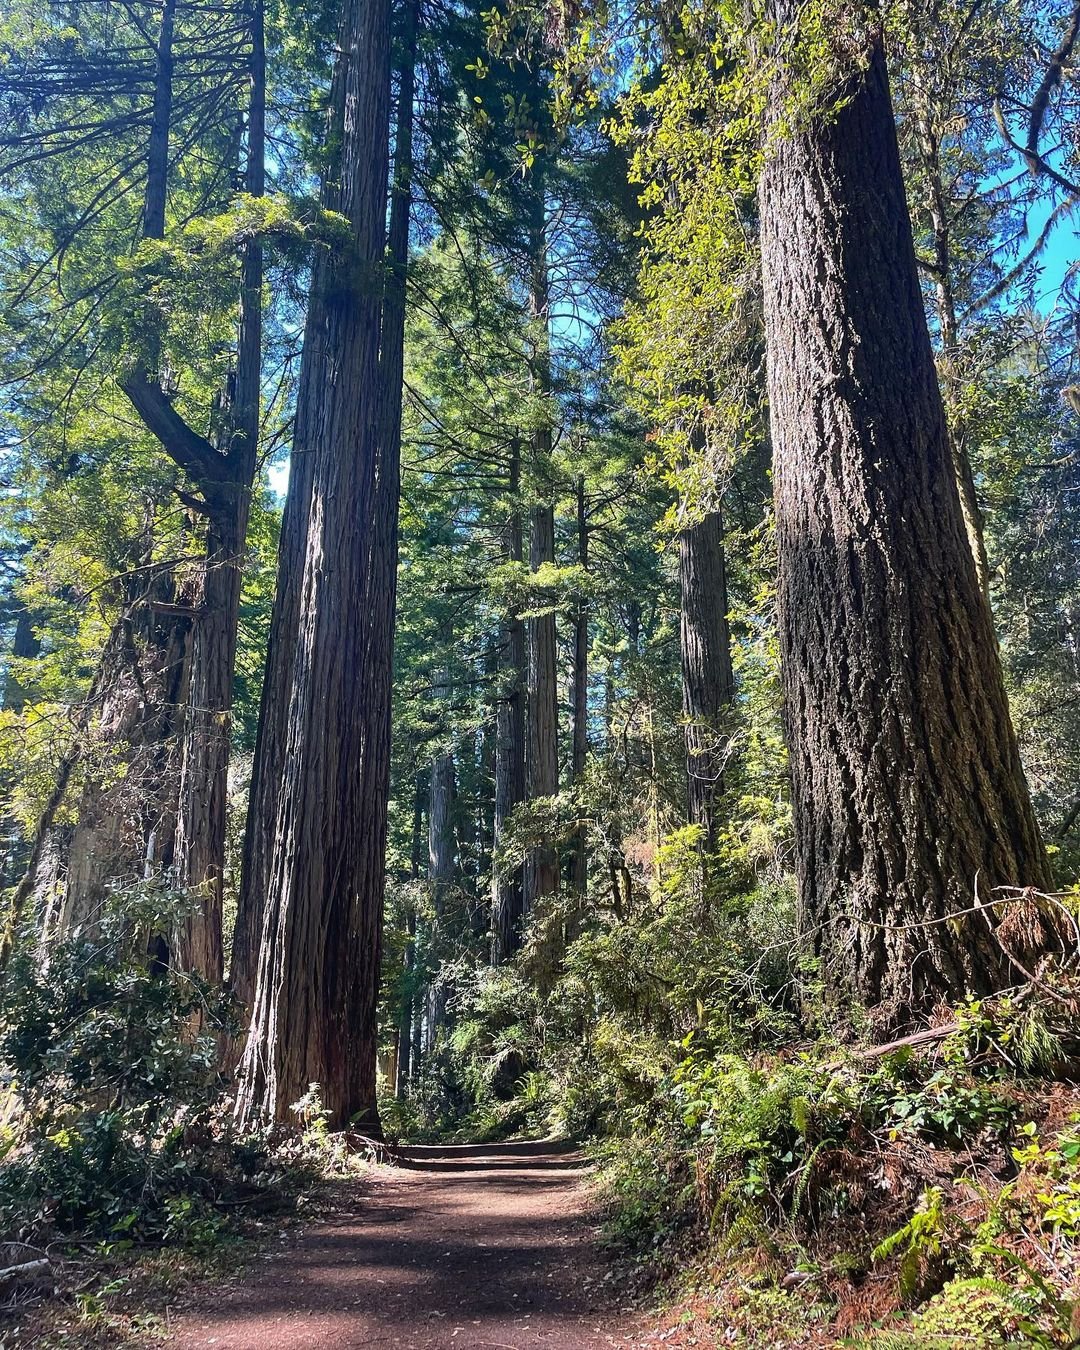 A trail winding through Coast Redwood trees in the woods.